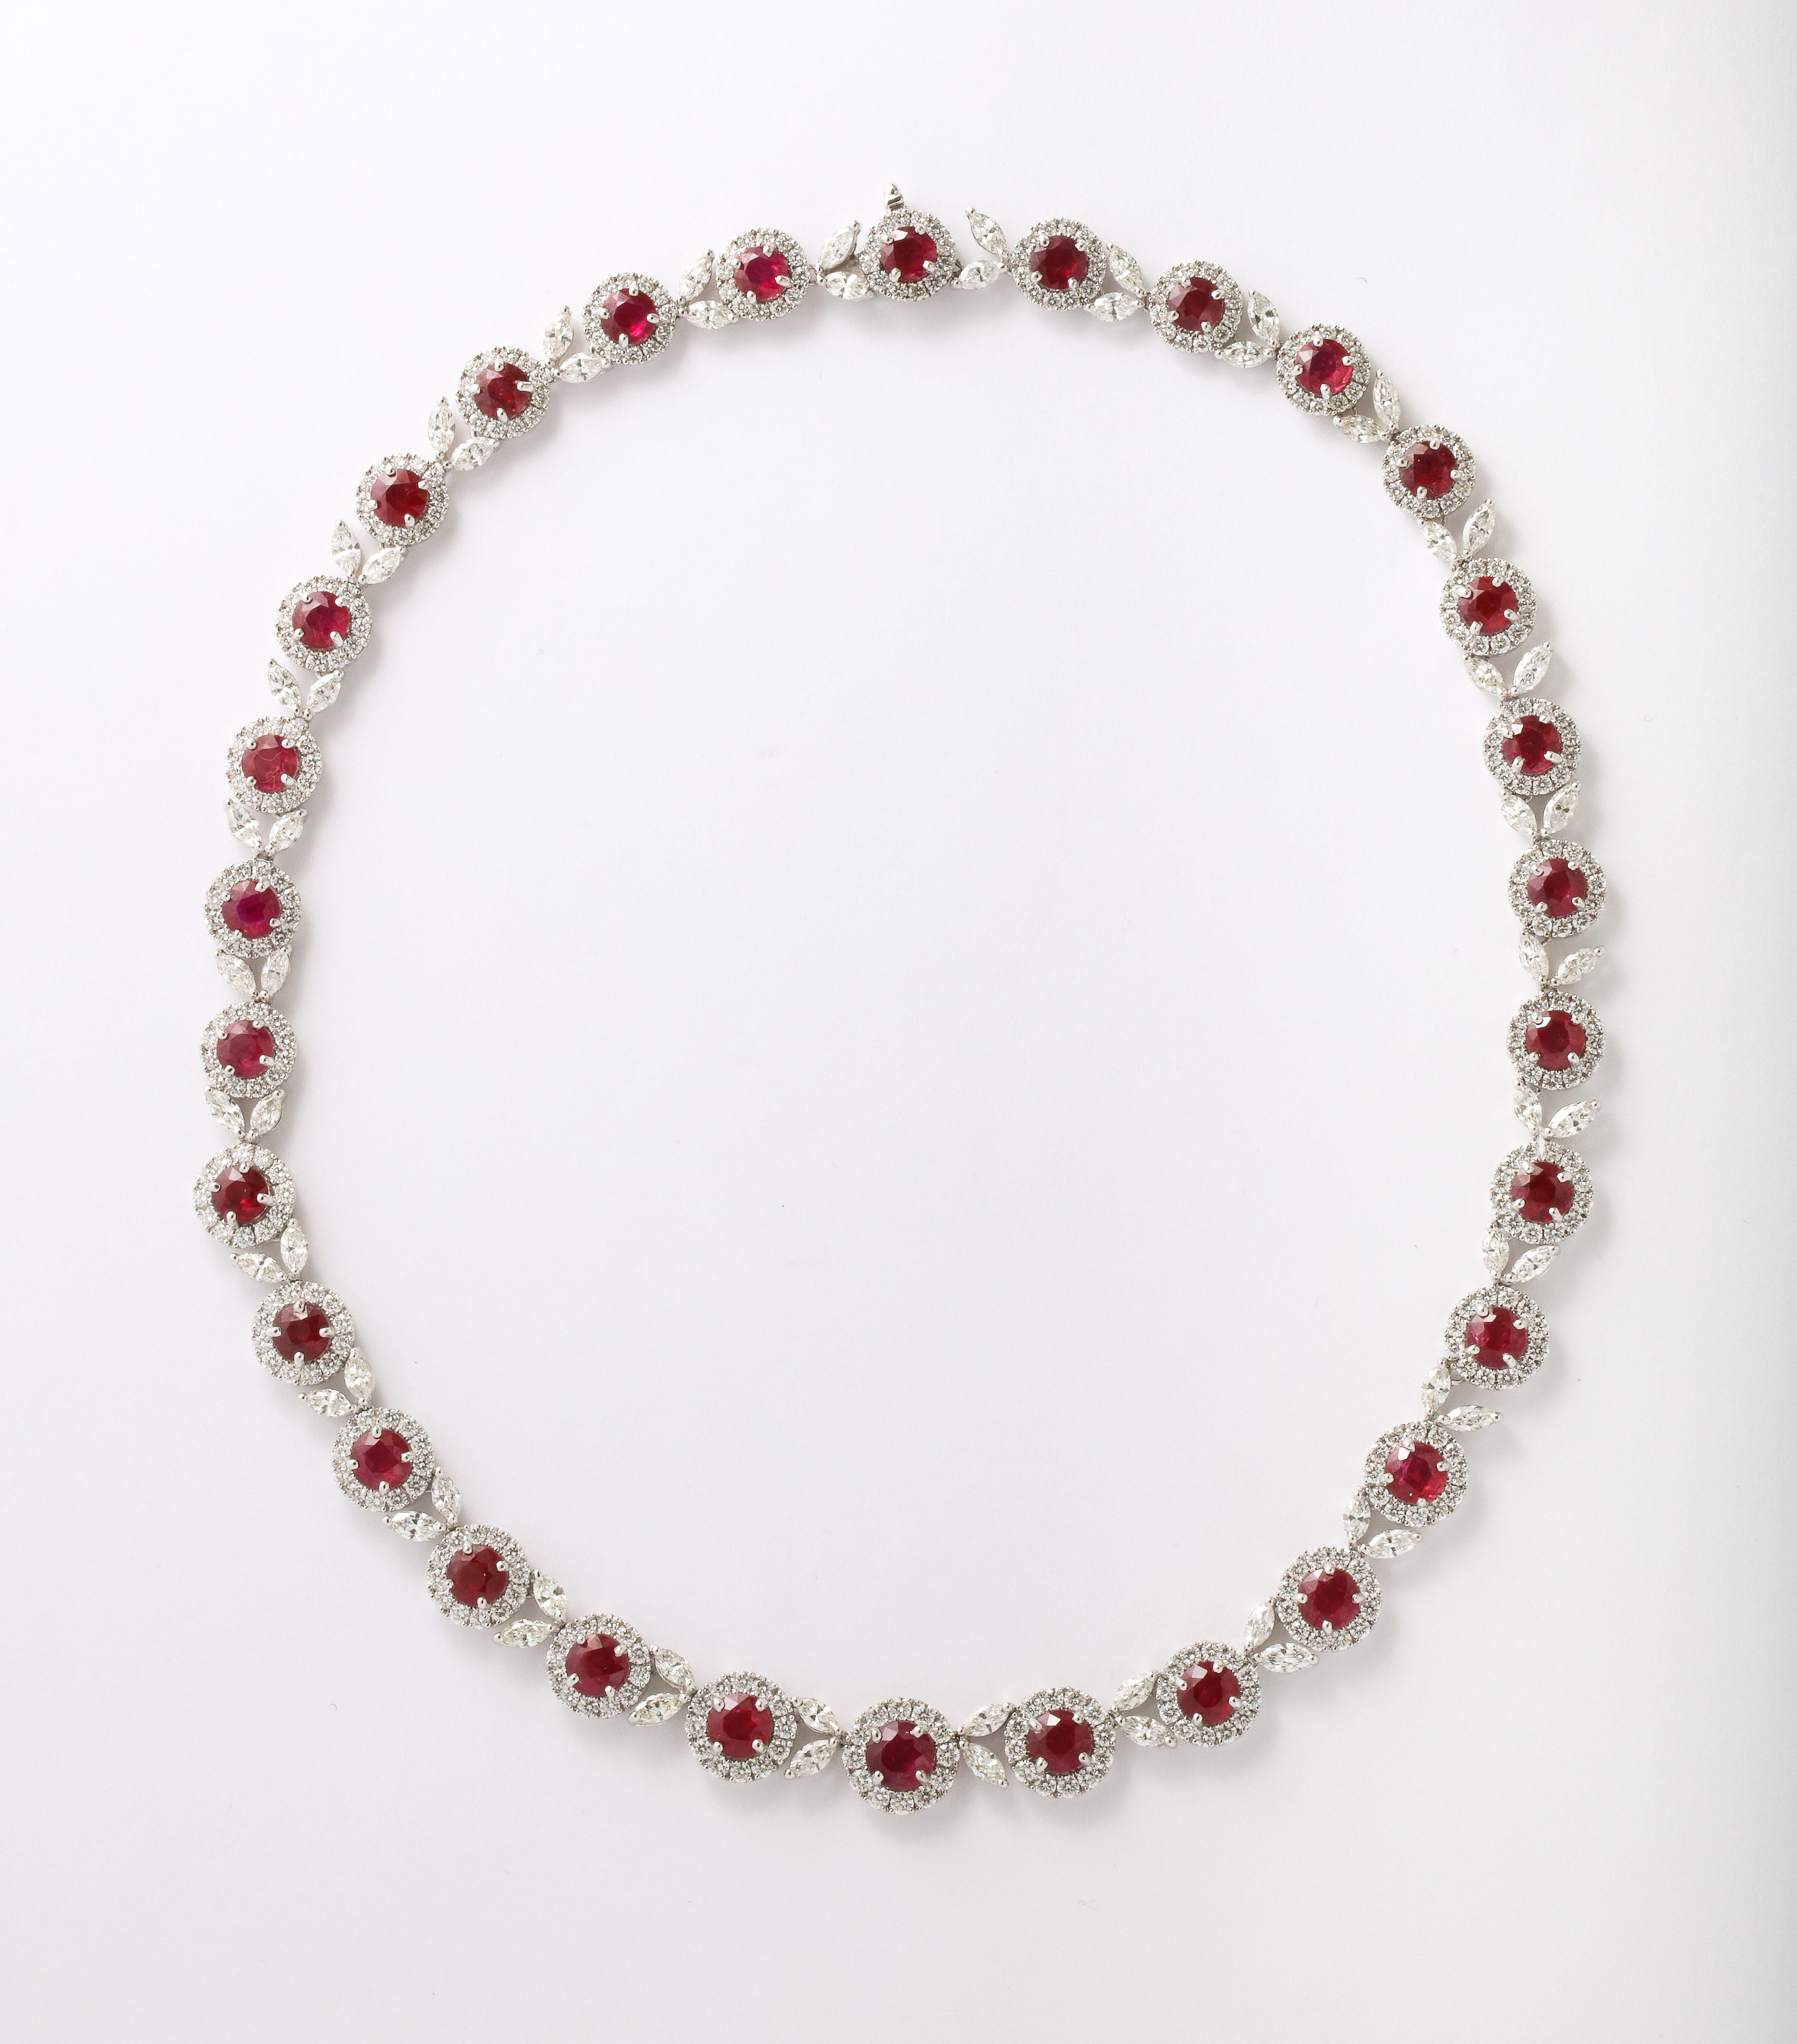 
A FABULOUS and wearable piece! 

Featuring 24.27 carats of Fine round Ruby with remarkable color. 

16.23 carats of white round and marquise diamonds. 

Set in 18k white gold 

16 inch length. 

Certified by Christian Dunaigre of Switzerland. The